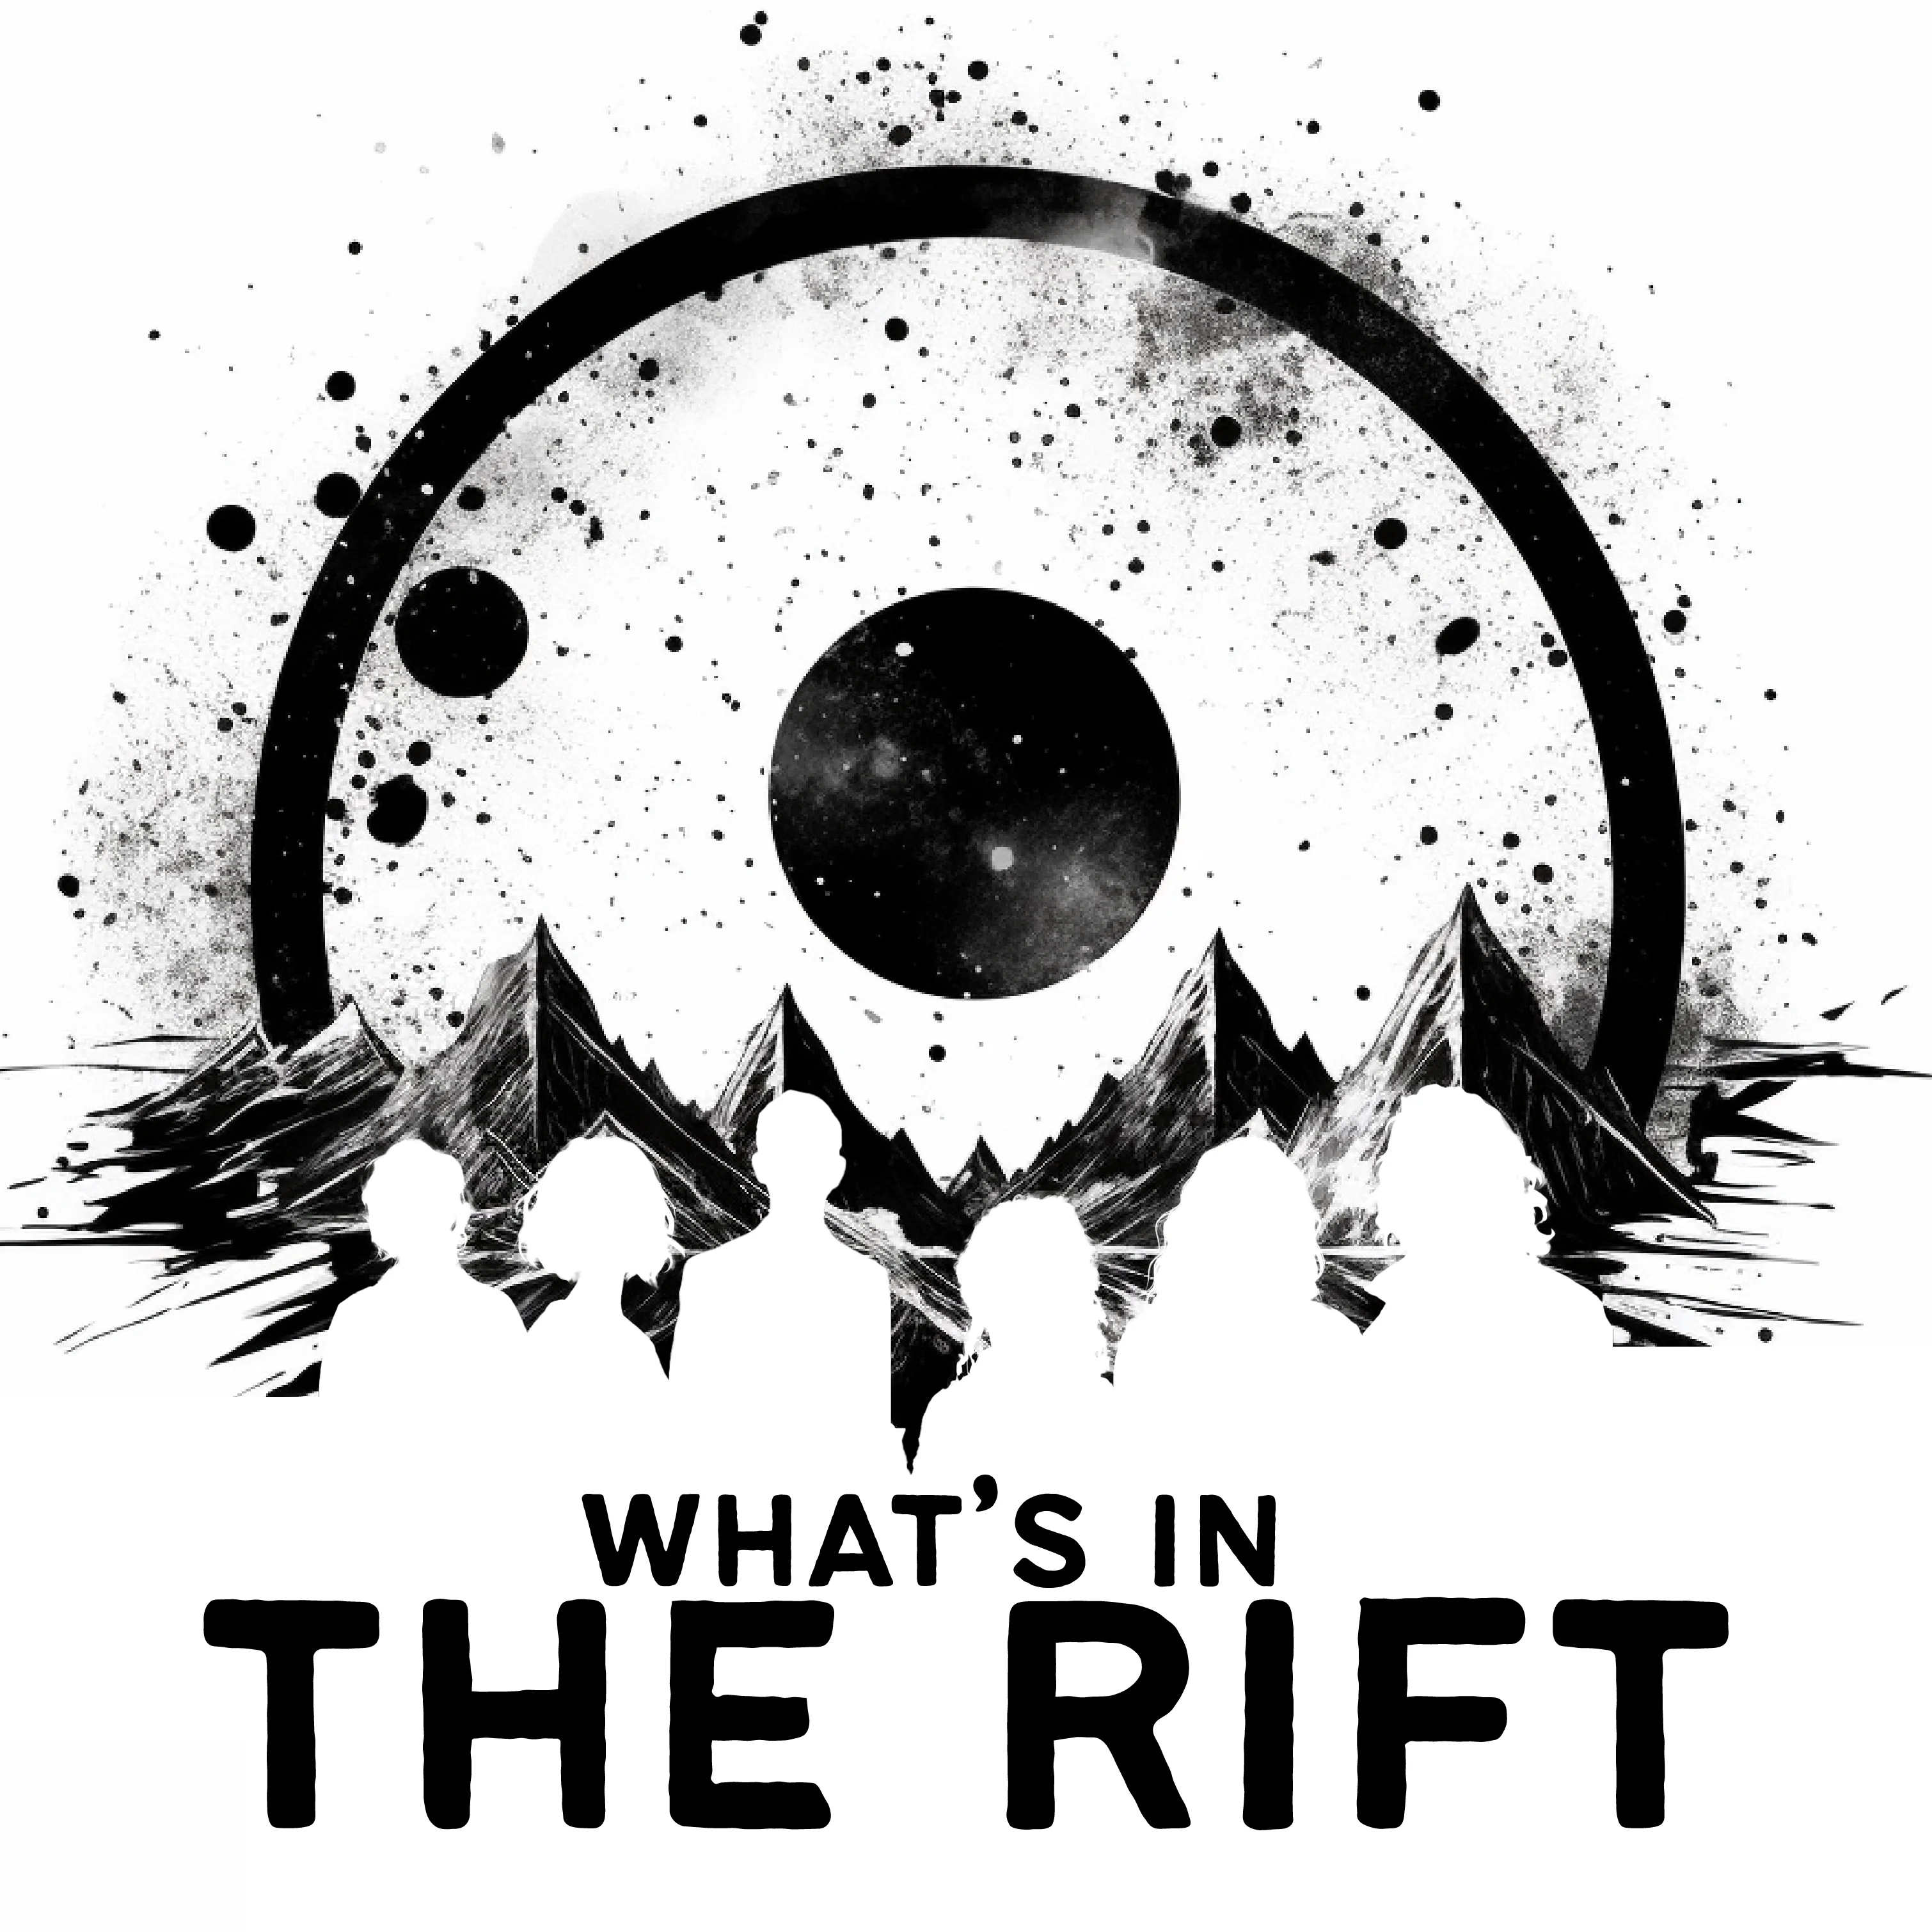 The showcard for What's in The Rift. The whole image is in stark black and white. The words What's in The Rift appear in the lower third, with the upper two thirds being occupied by the silhouettes of six people standing in front of four black mountains.